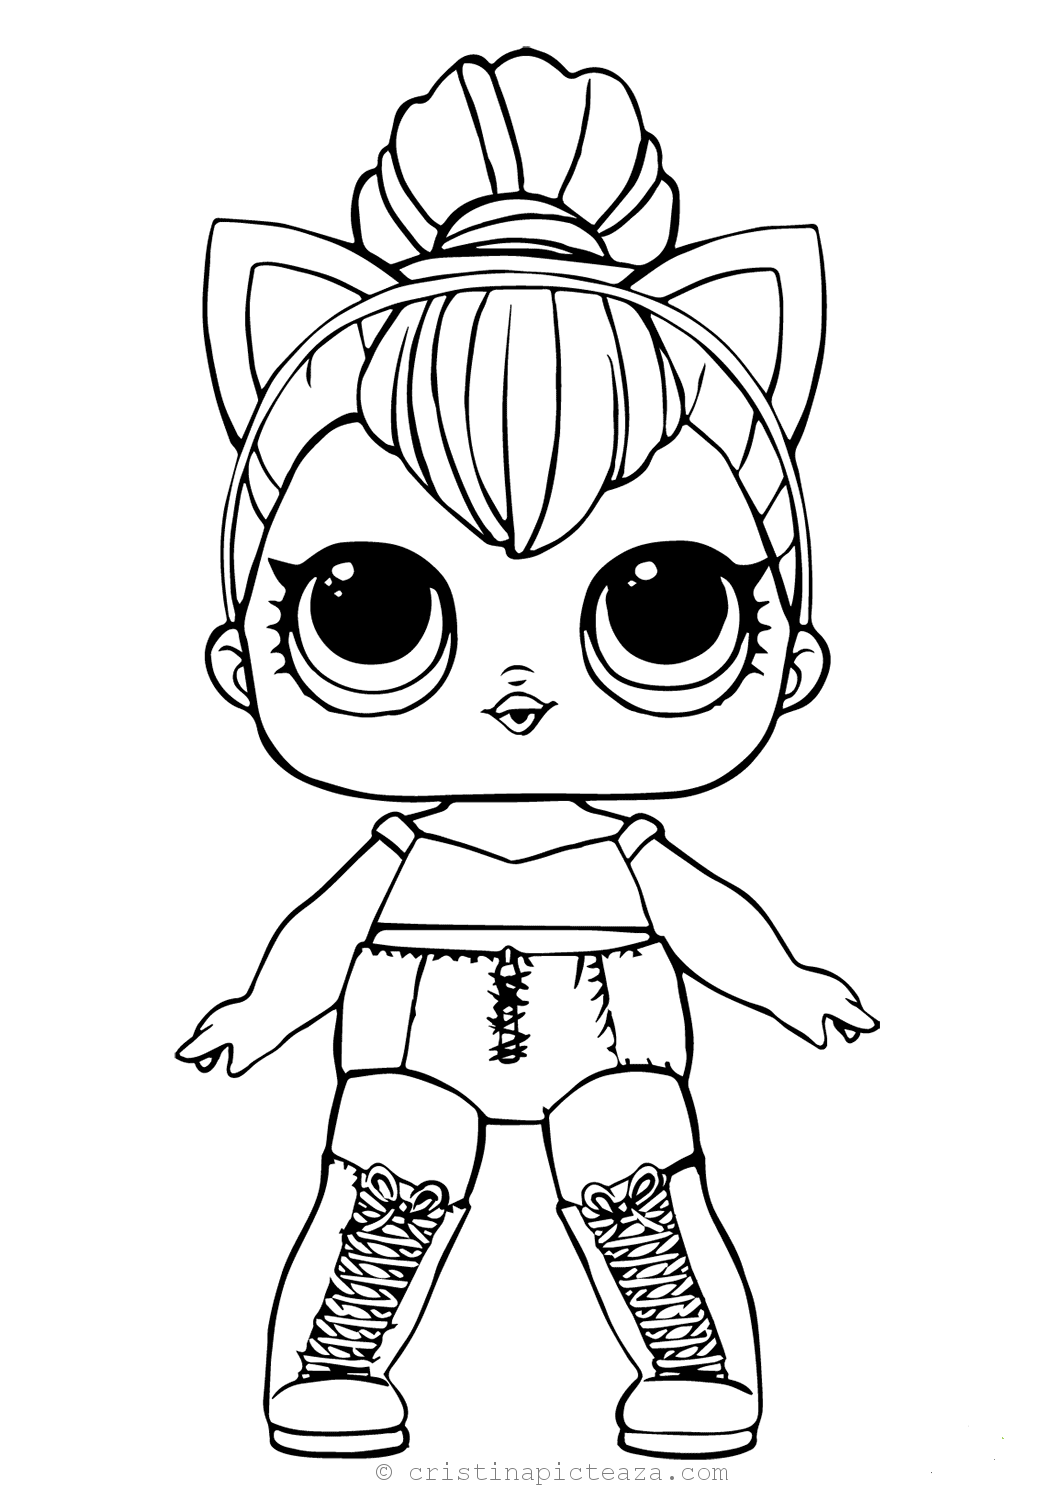 dolls coloring pages lol coloring pages lol dolls for coloring and painting dolls pages coloring 